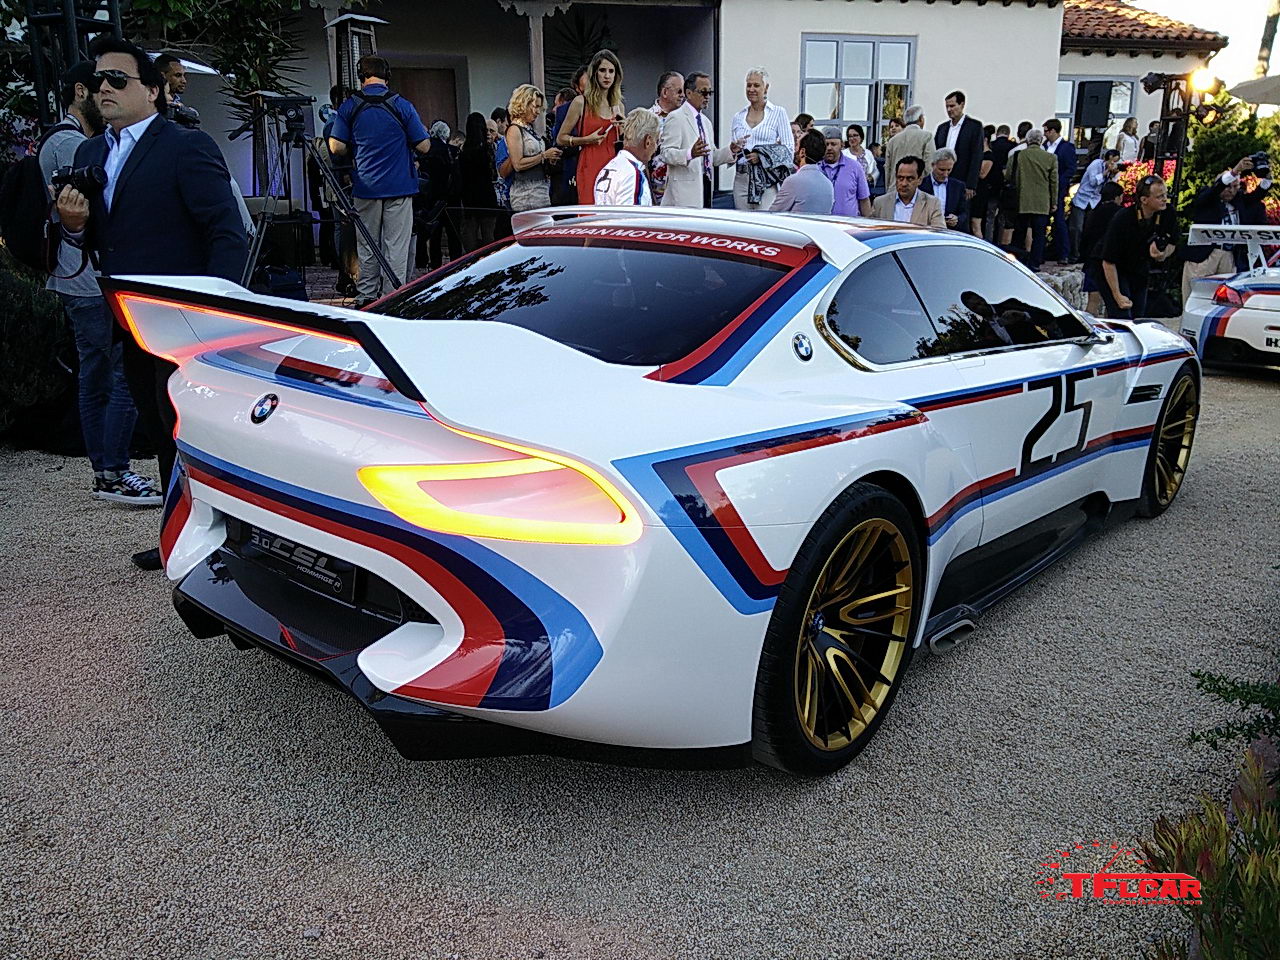 Bmw 3 0 Csl Hommage R Celebrates Early Success Of Bmw Racing Photo Gallery The Fast Lane Car